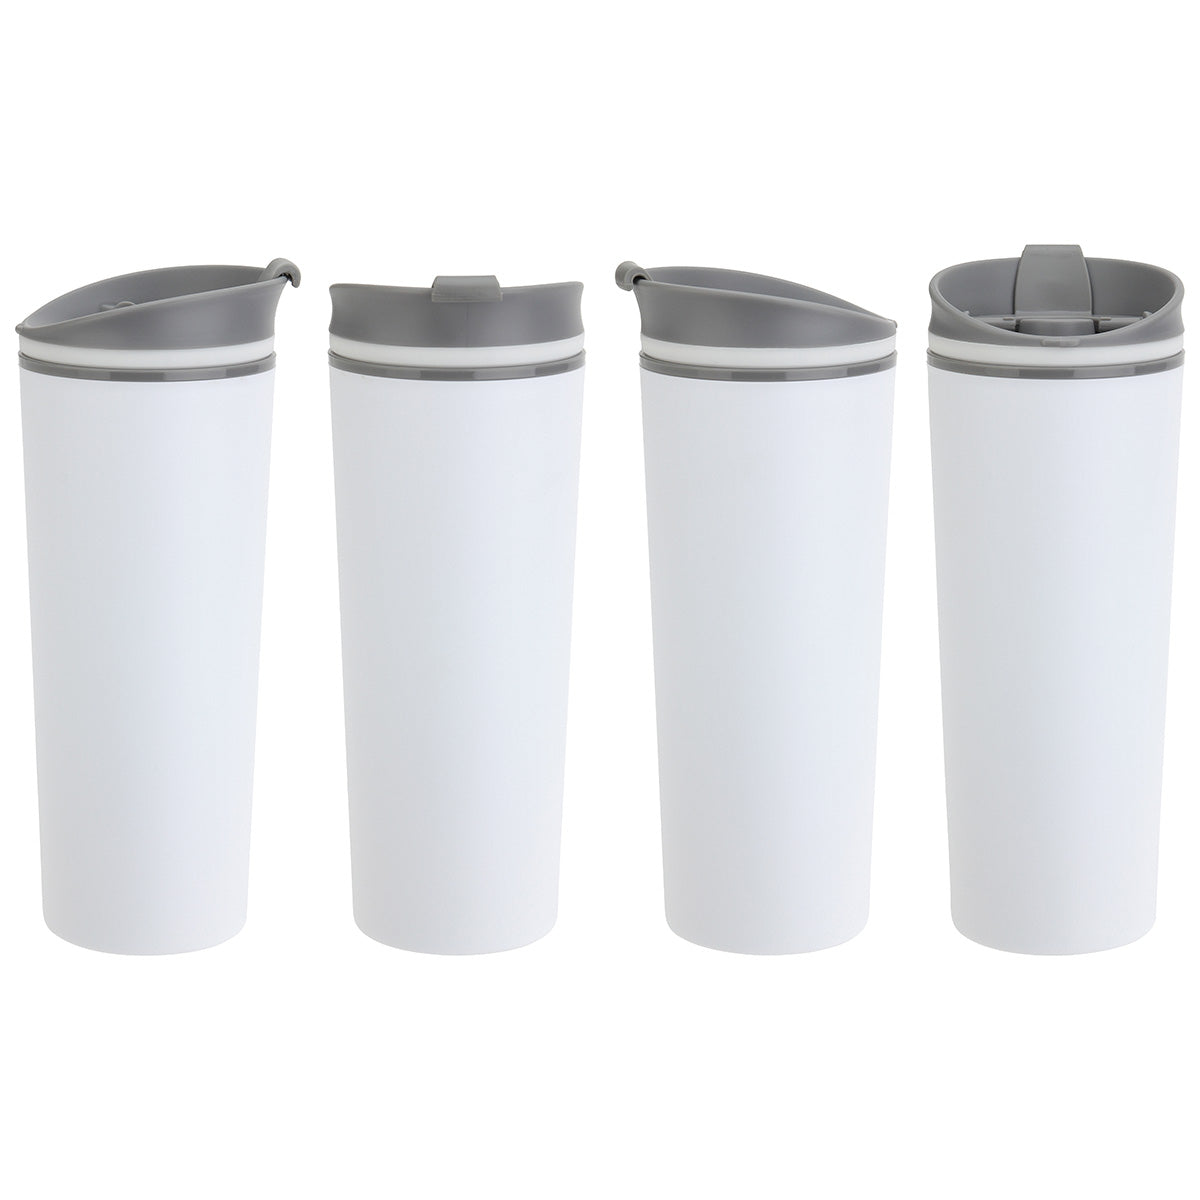 Commuter 17 oz Double-wall Polypropylene Tumbler with Flip Top Closure